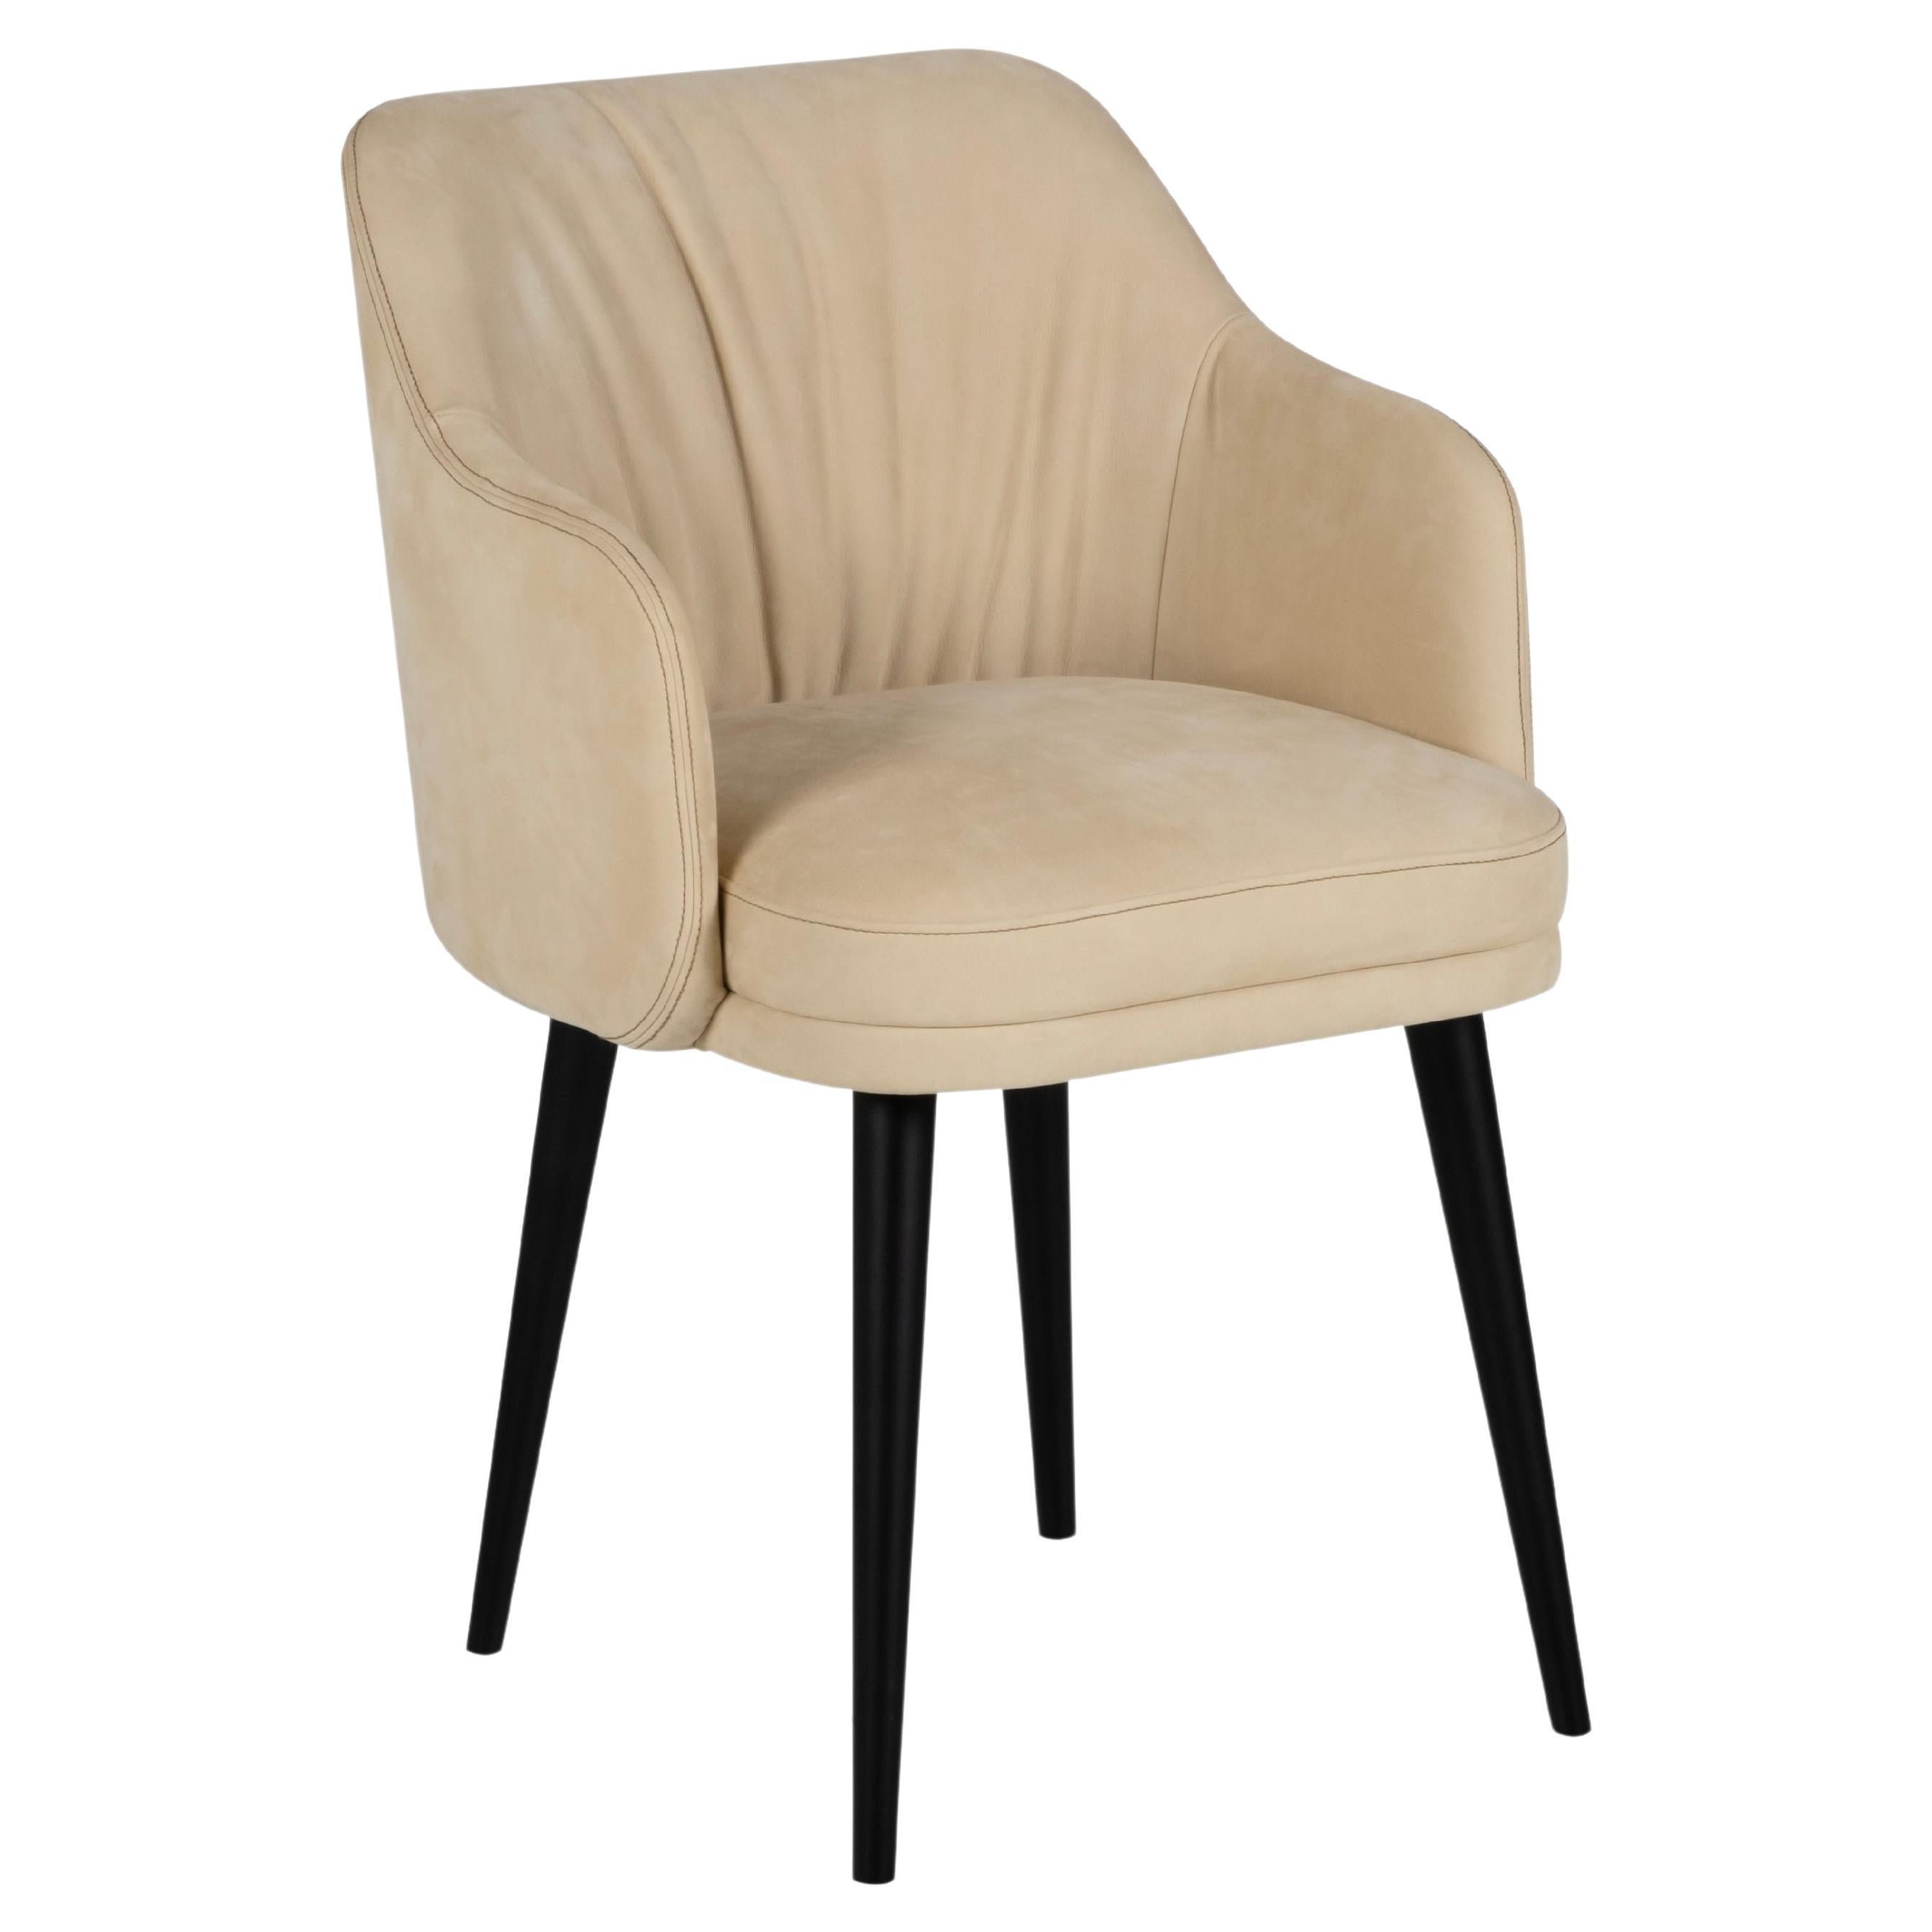 Modern Margot Dining Chairs, Nubuck Leather, Handmade in Portugal by Greenapple For Sale